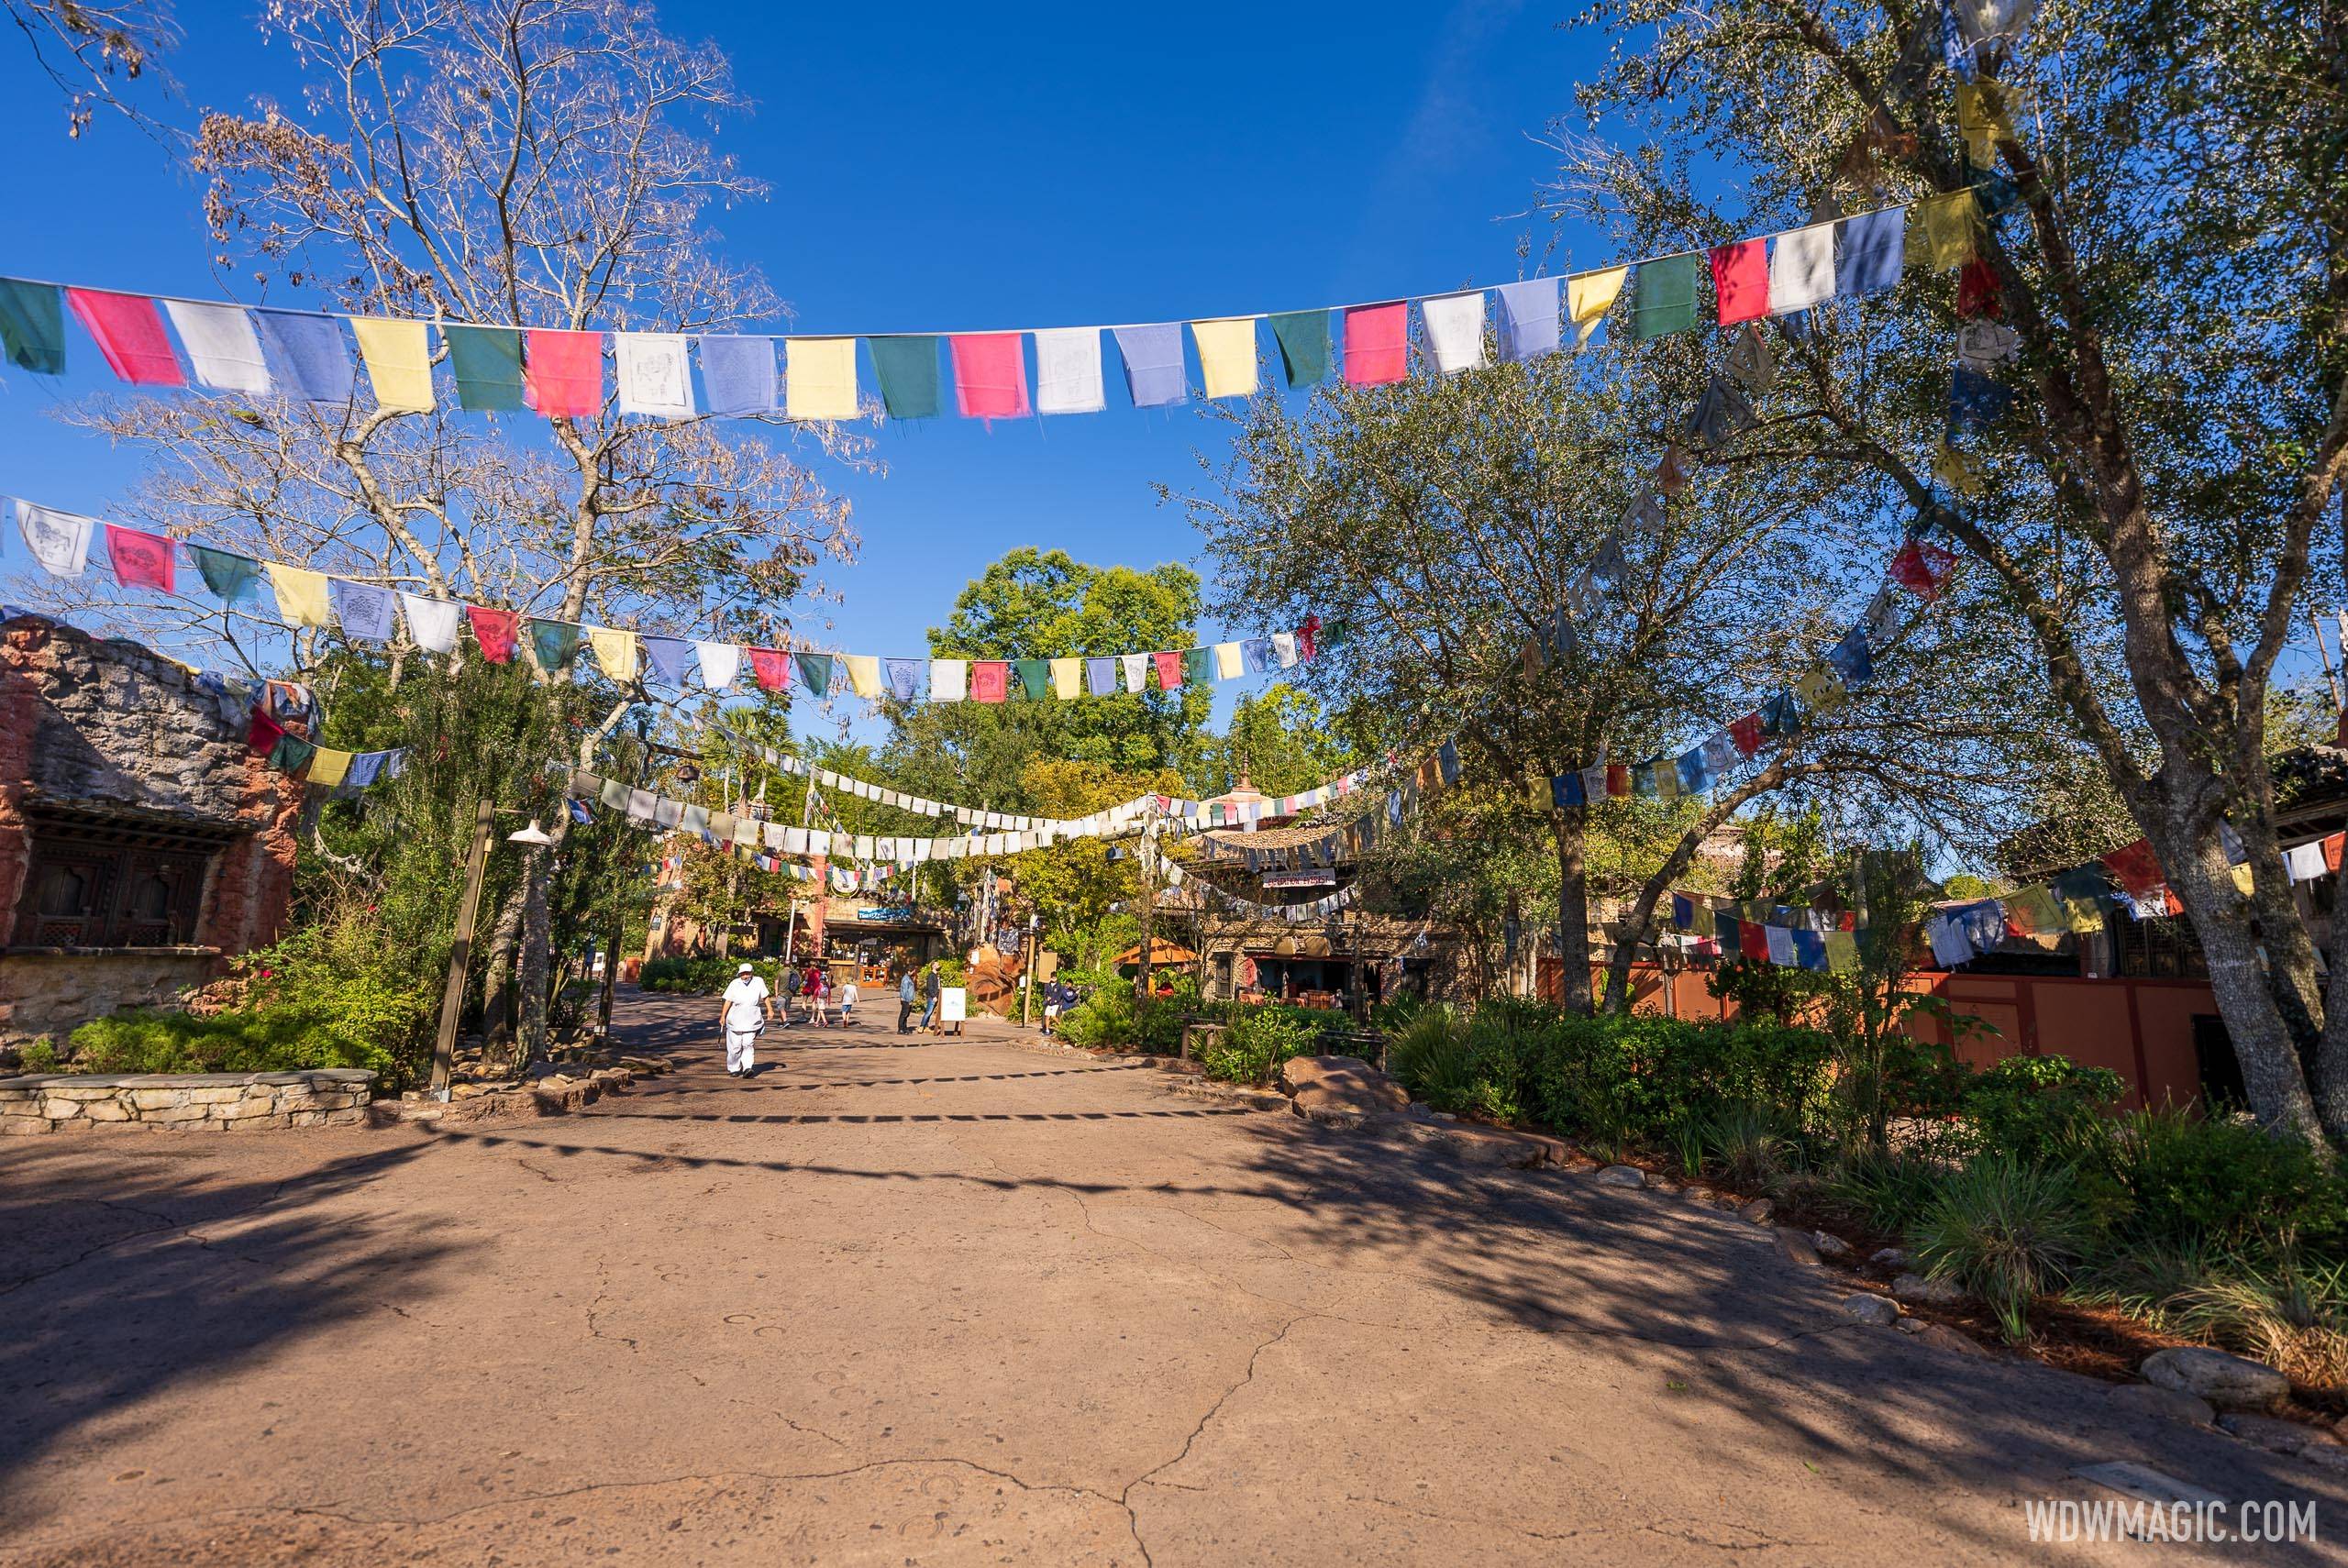 Expedition Everest closed for refurbishment January 2022